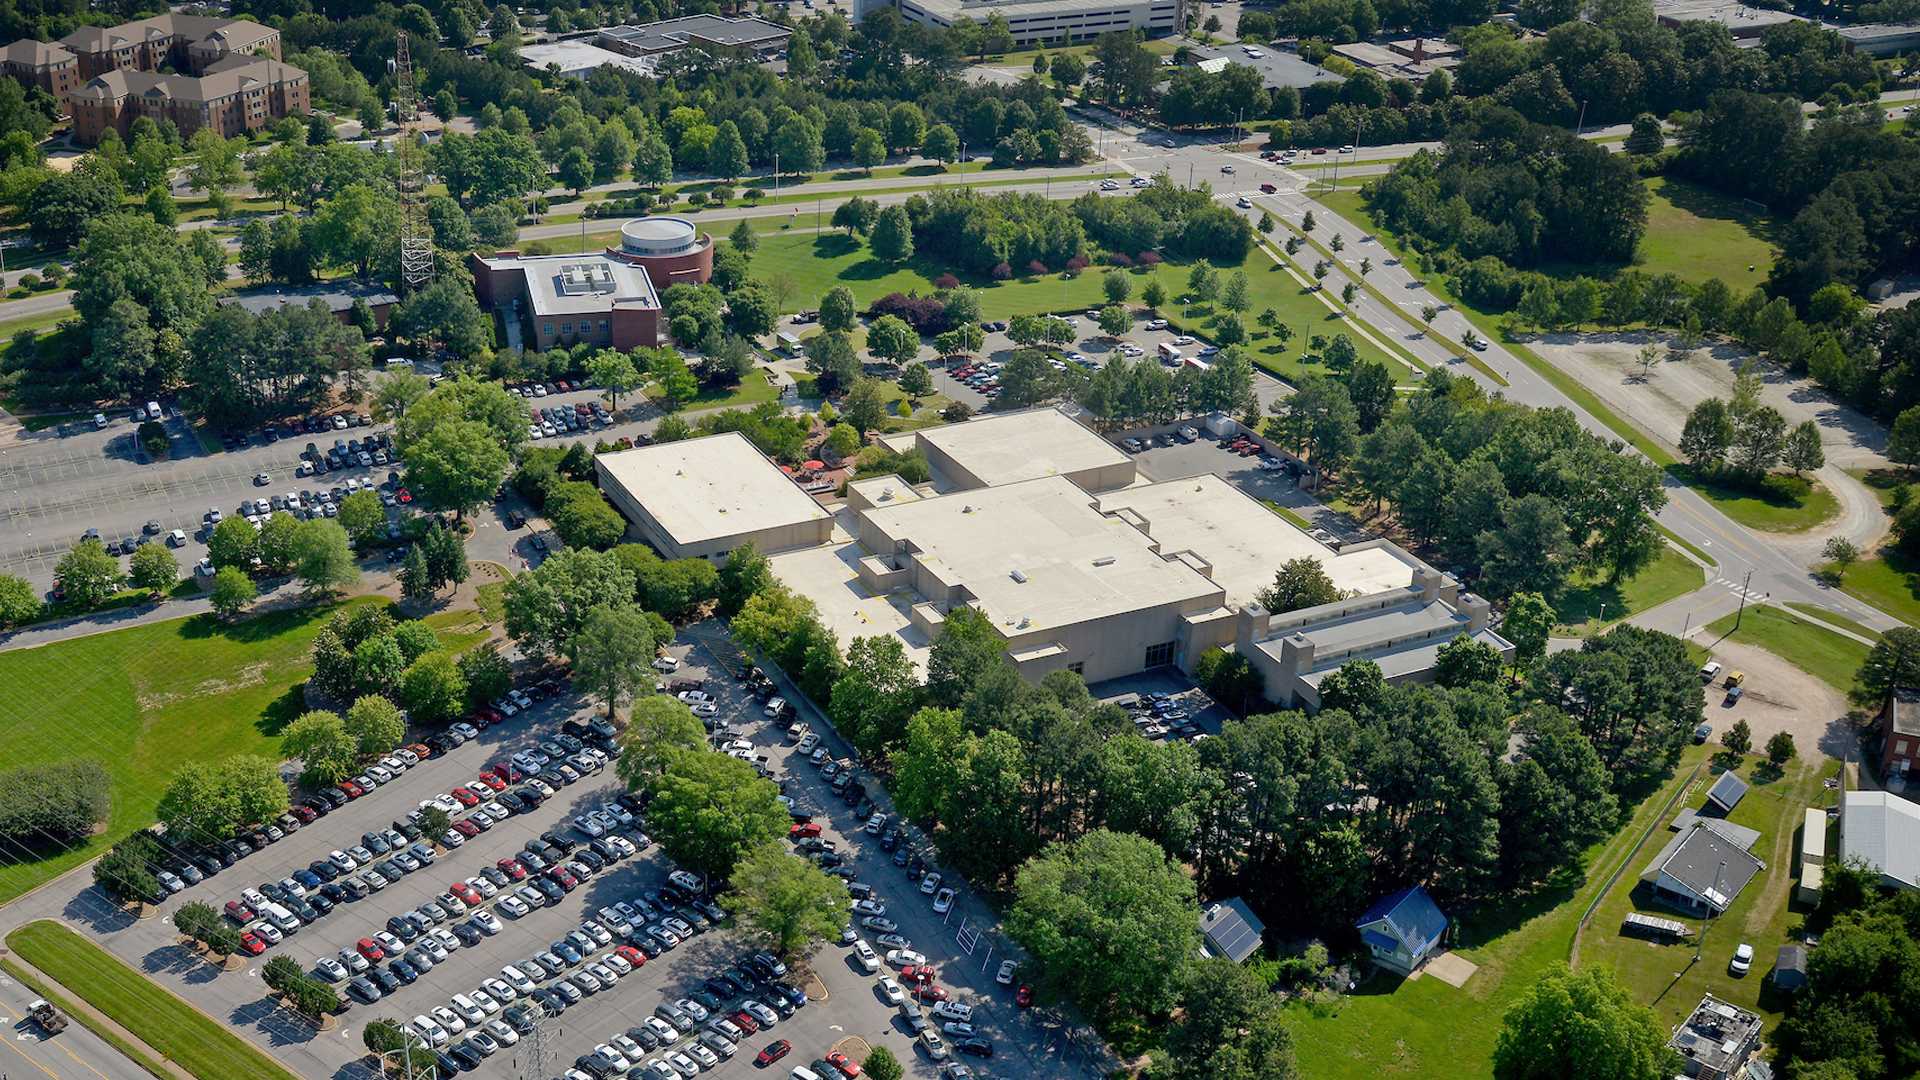 An aerial view of the McKimmon Center on NC State's campus.